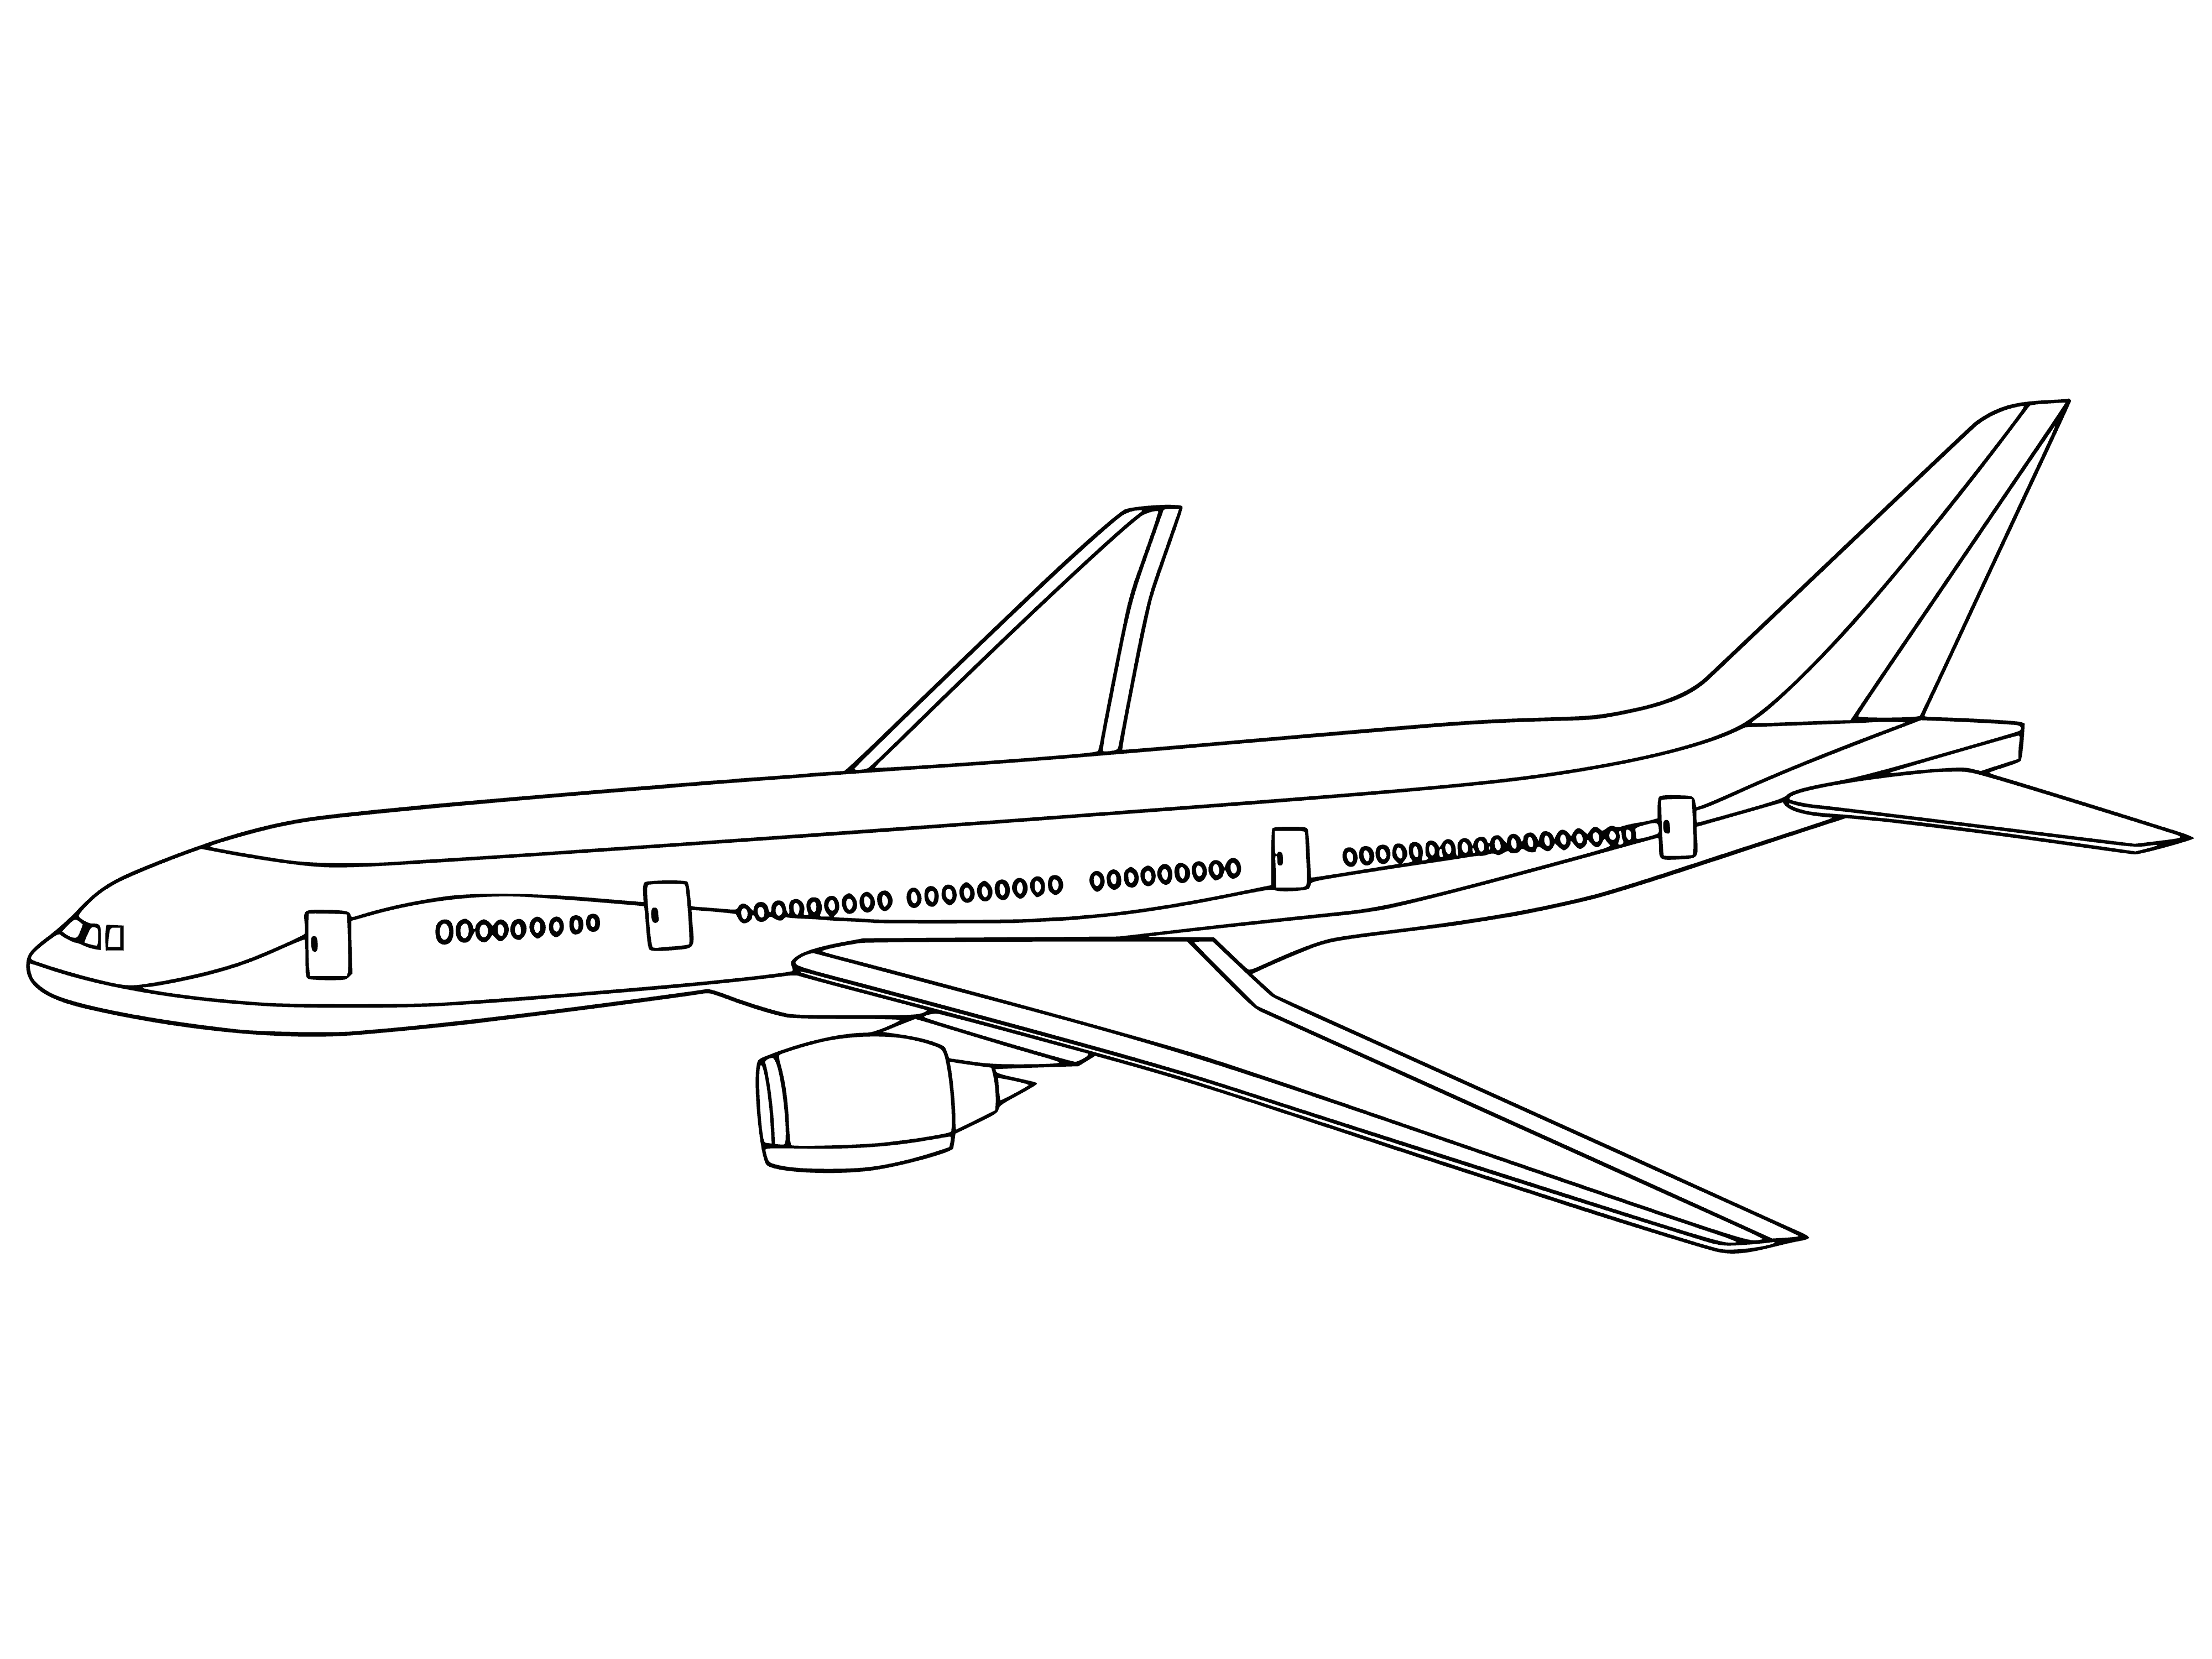 coloring page: Metal tube-shaped aircraft with attached wings, turbines, and windows sits on runway.